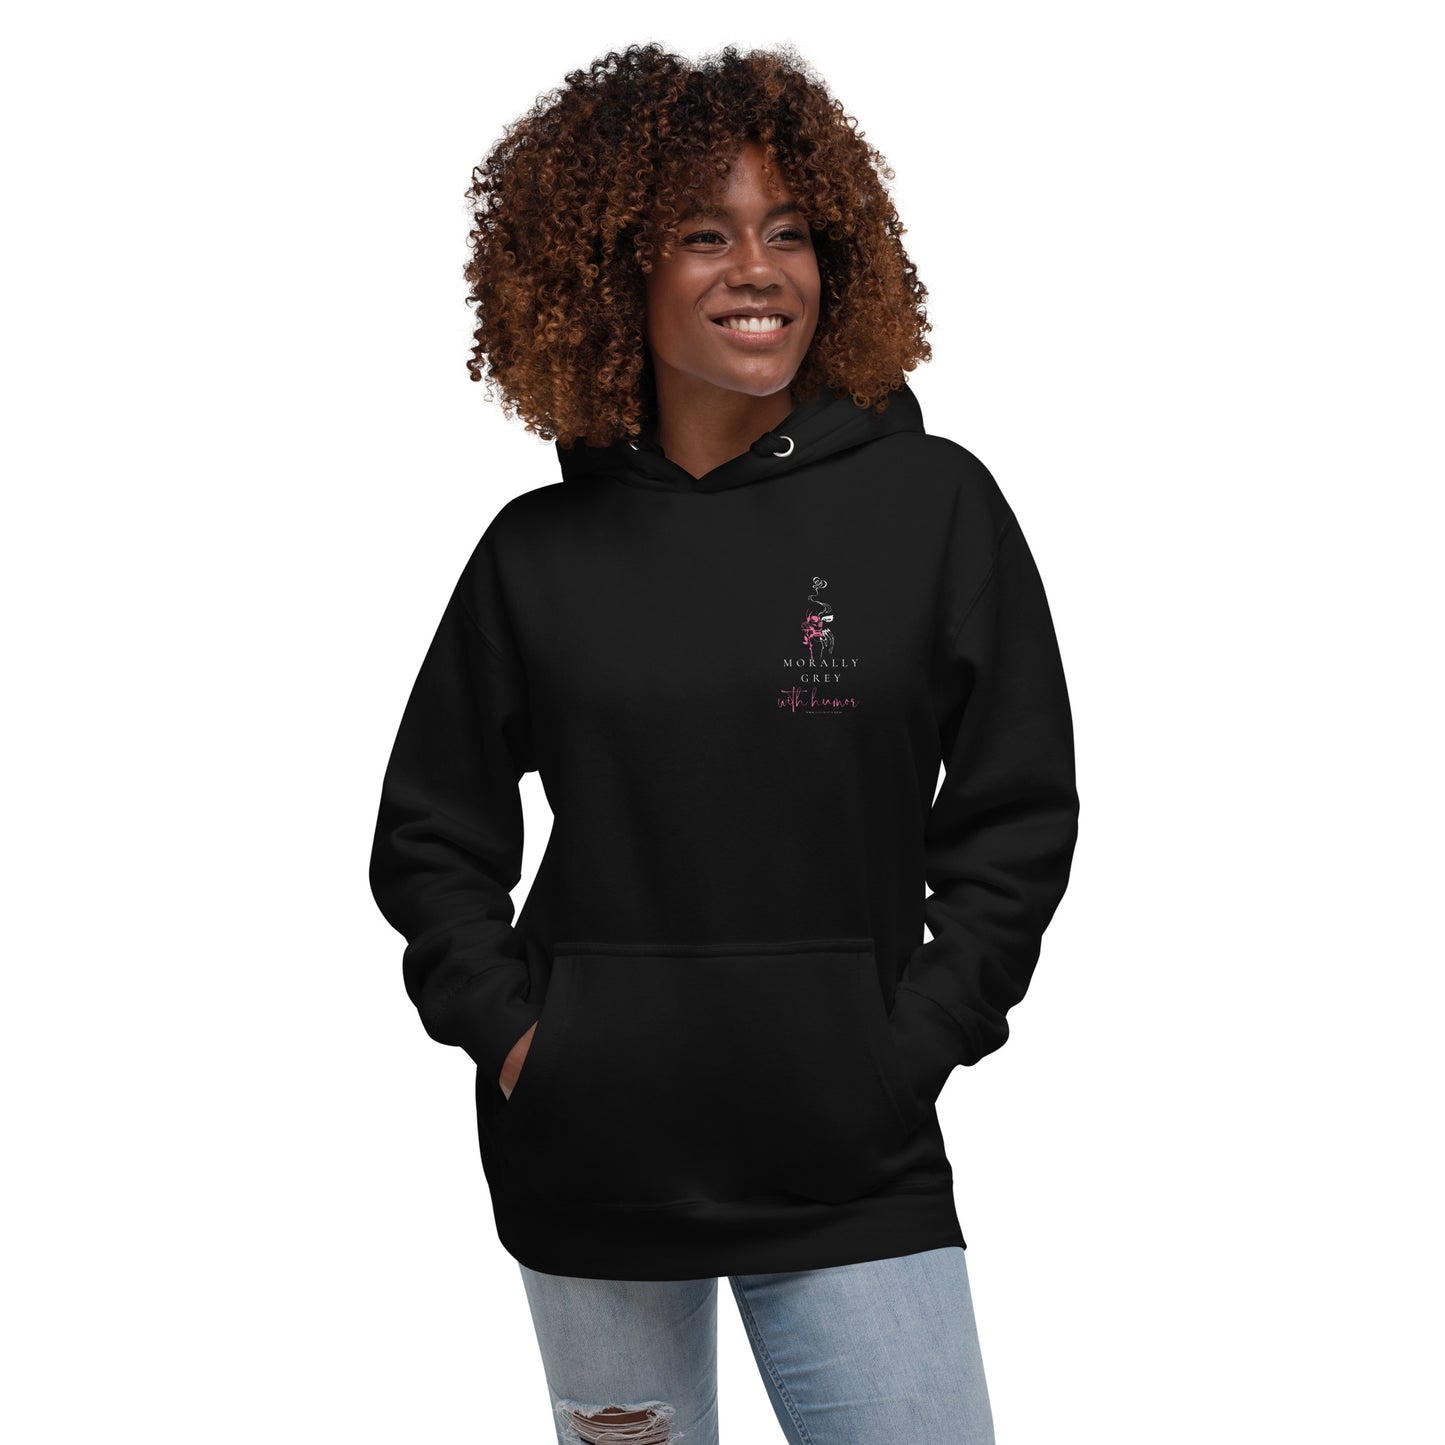 Morally Grey with Humor Unisex Hoodie